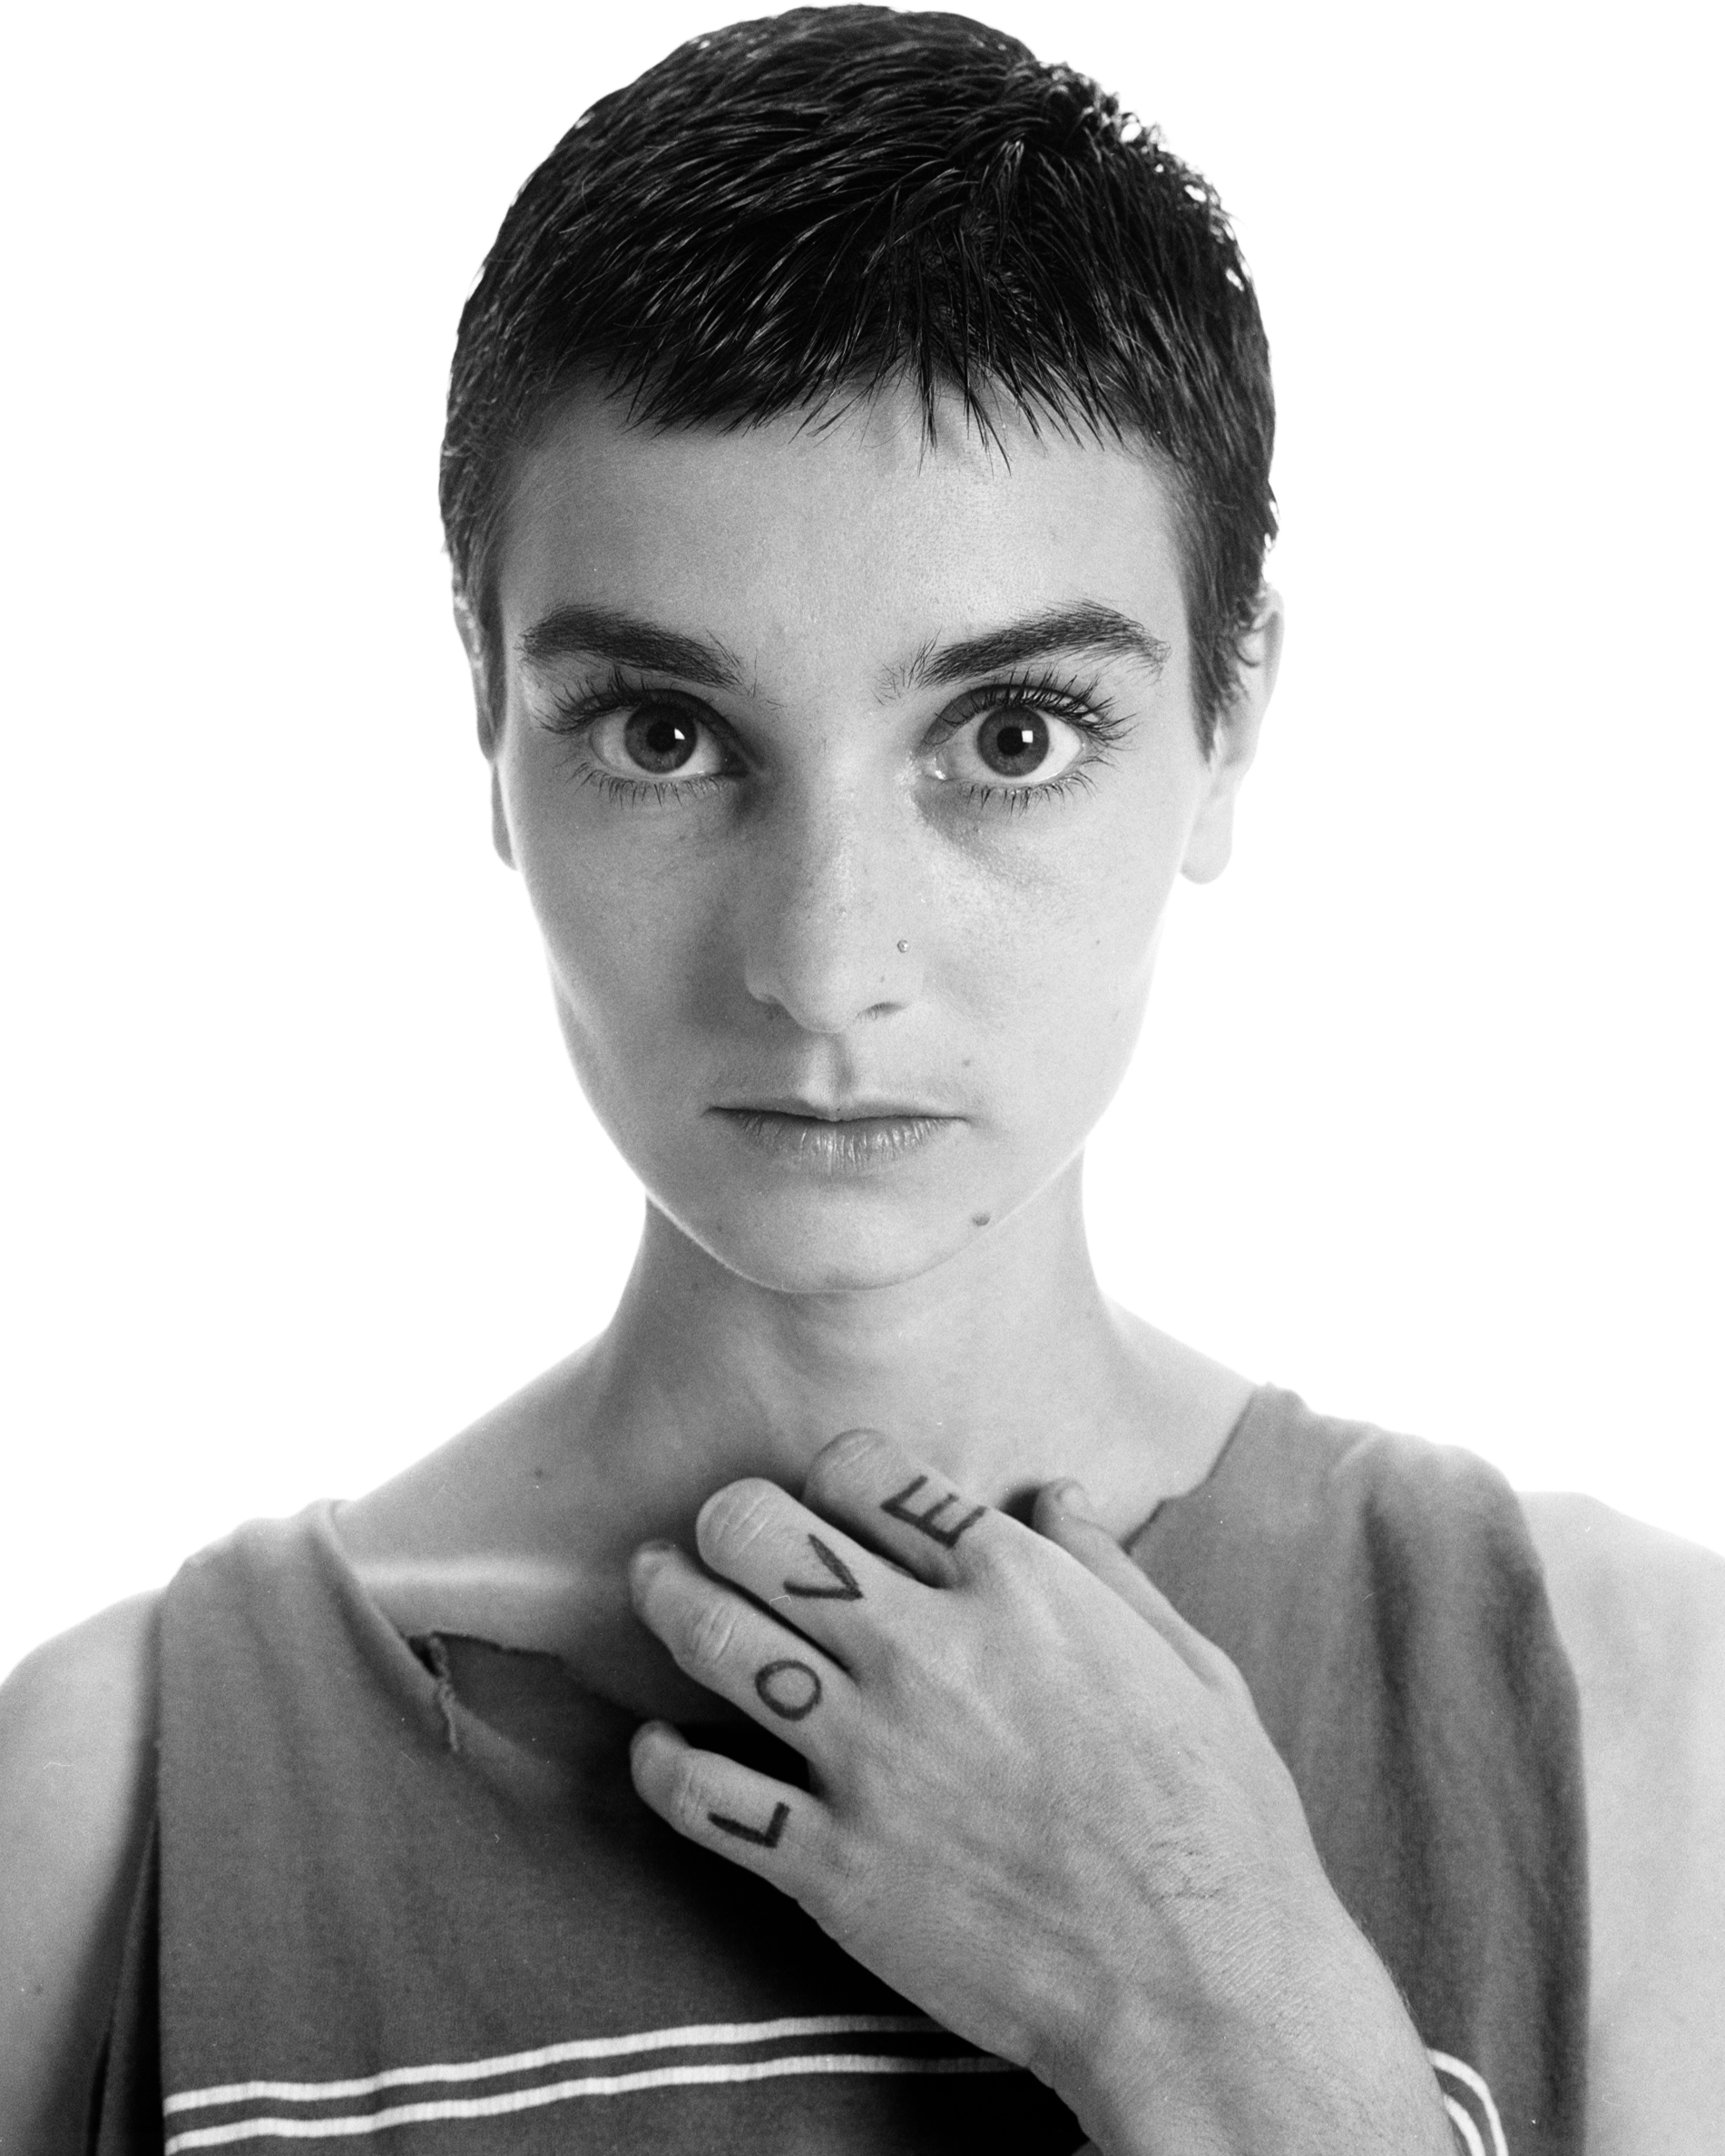 Sinéad O'Connor posing in a black and white photo with the word "love" written on her fingers, 1994 | Source: Getty Images